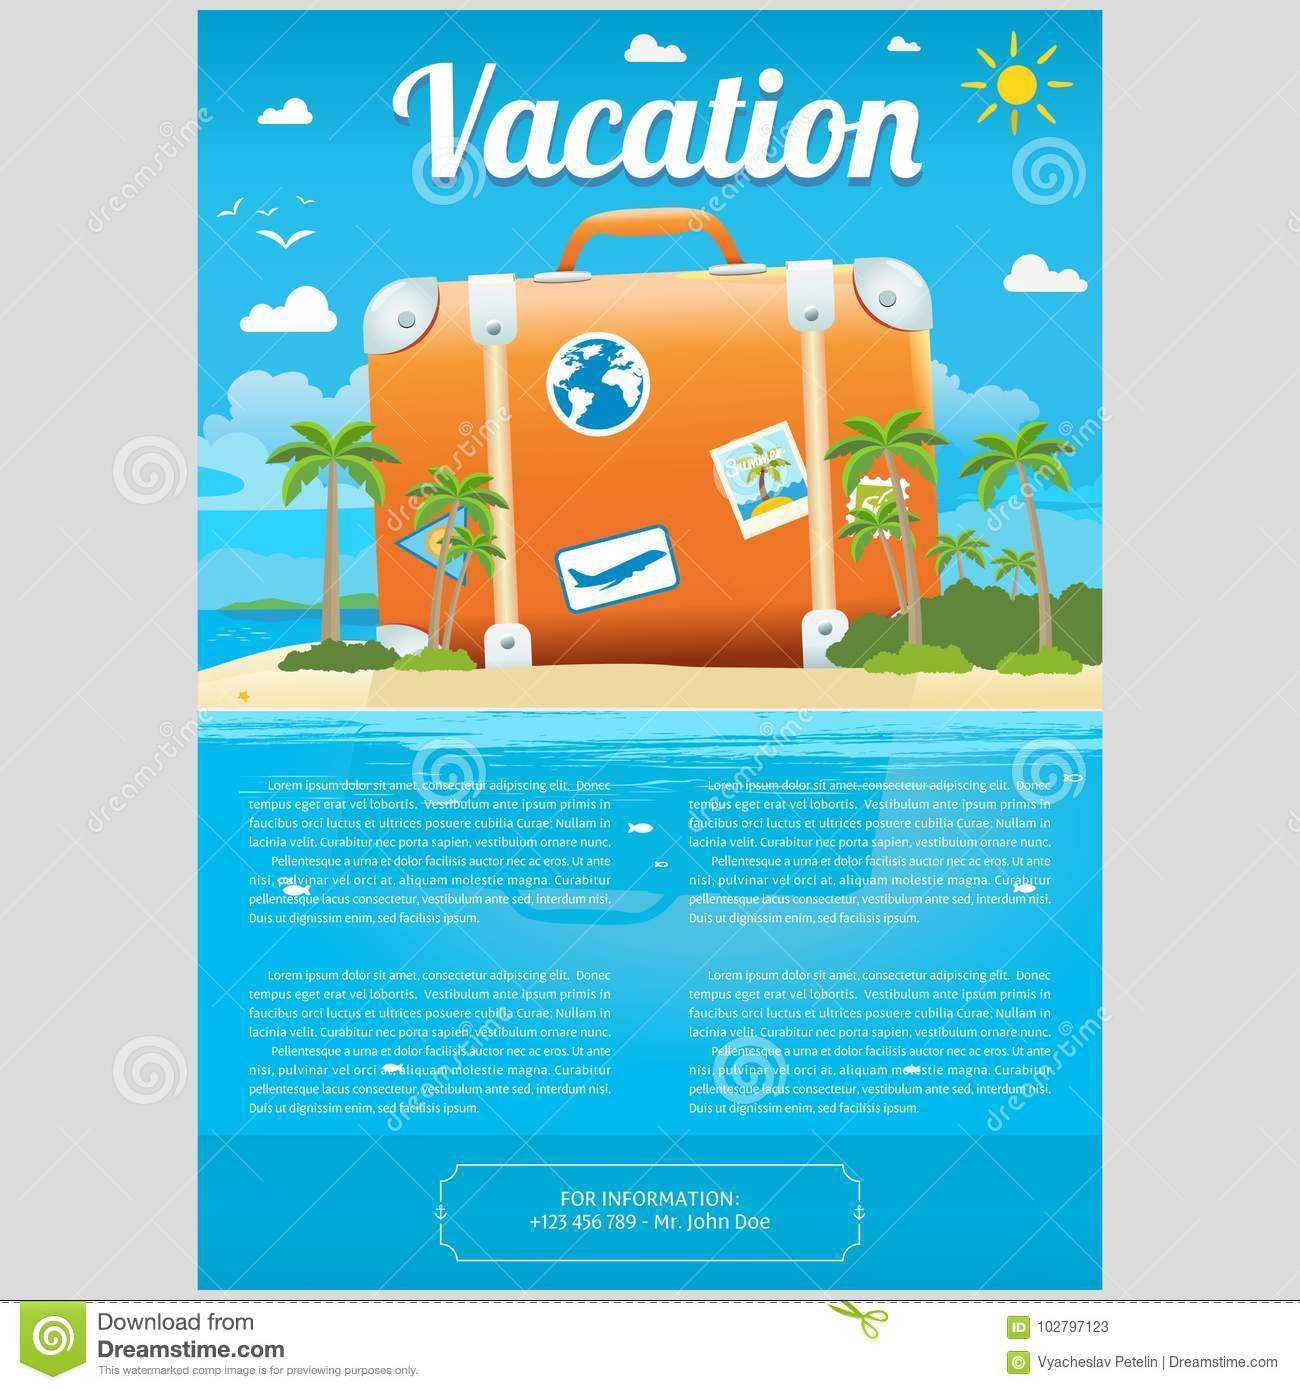 Vector Illustration Of Travel Suitcase On The Sea Island With Island Brochure Template